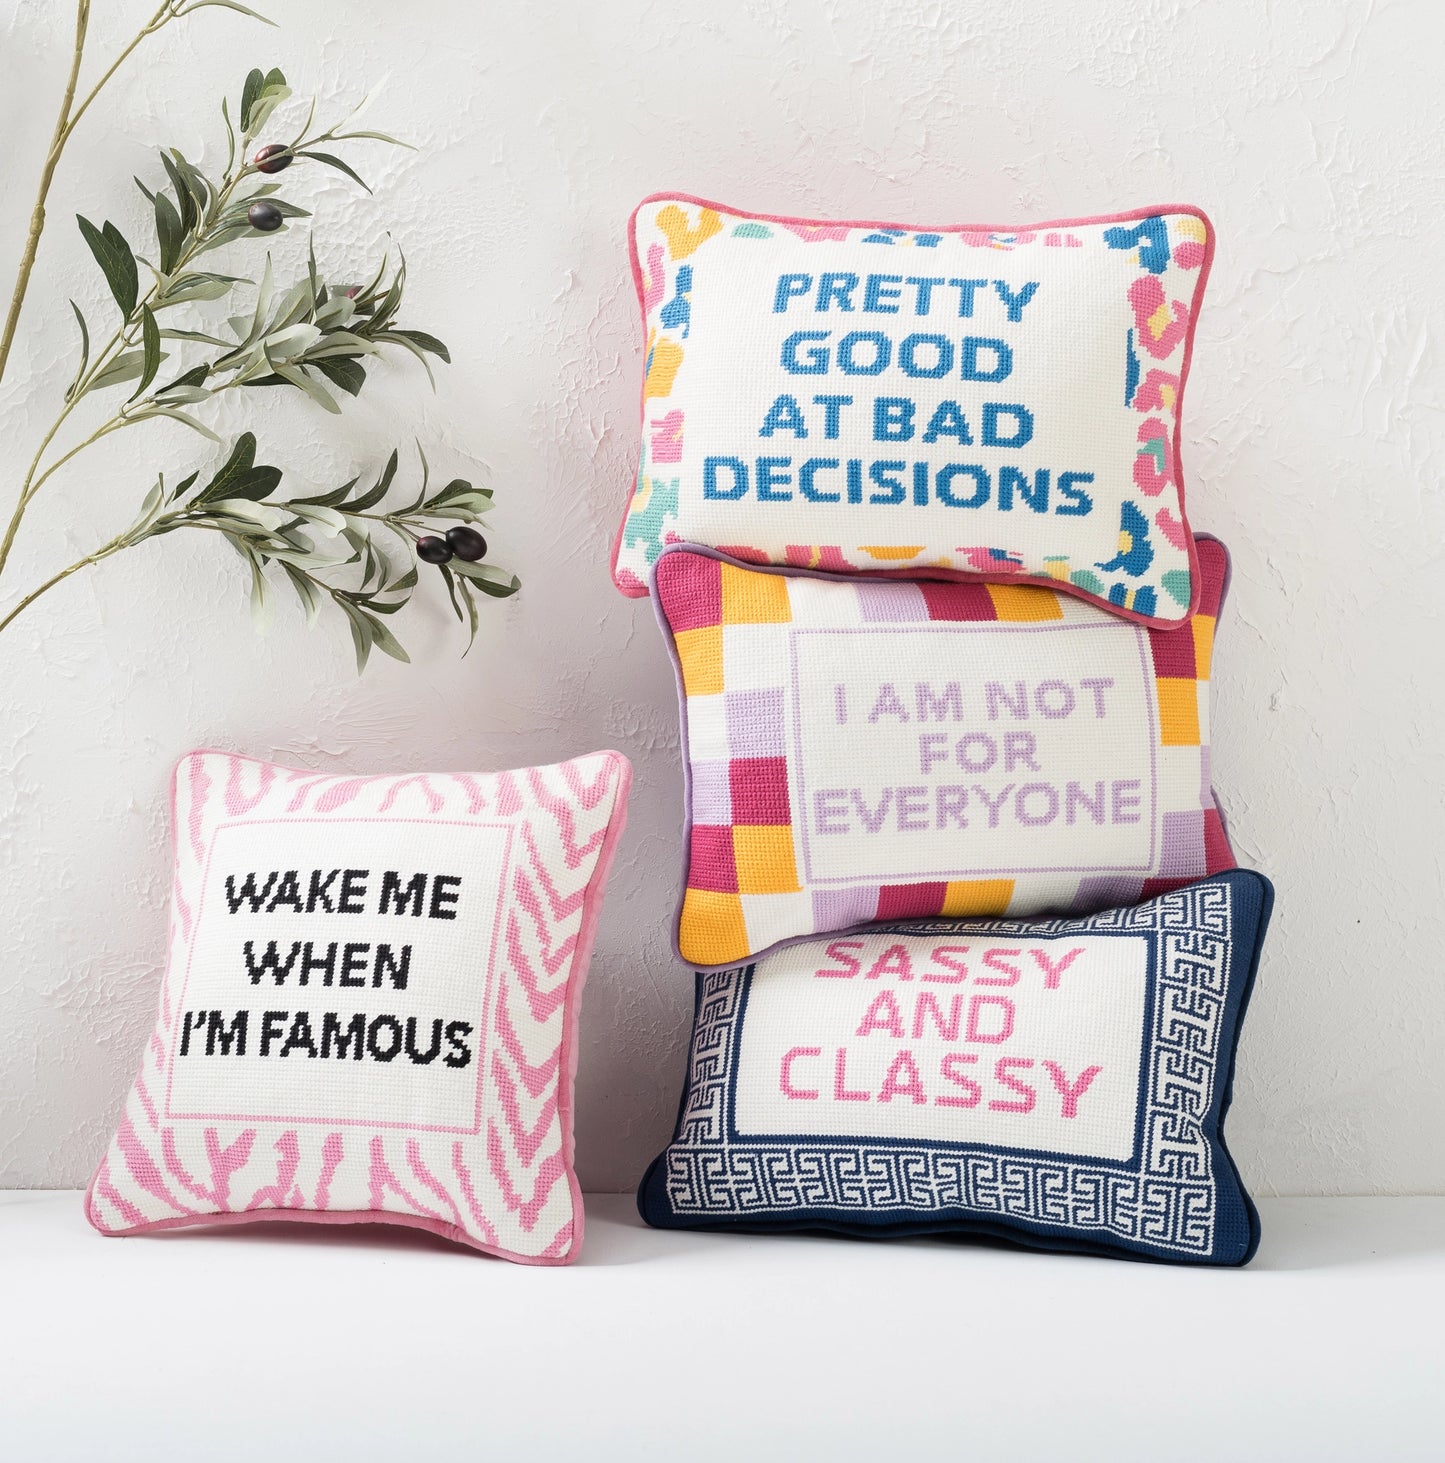 Pretty Good At Bad Decisions Needlepoint Pillow